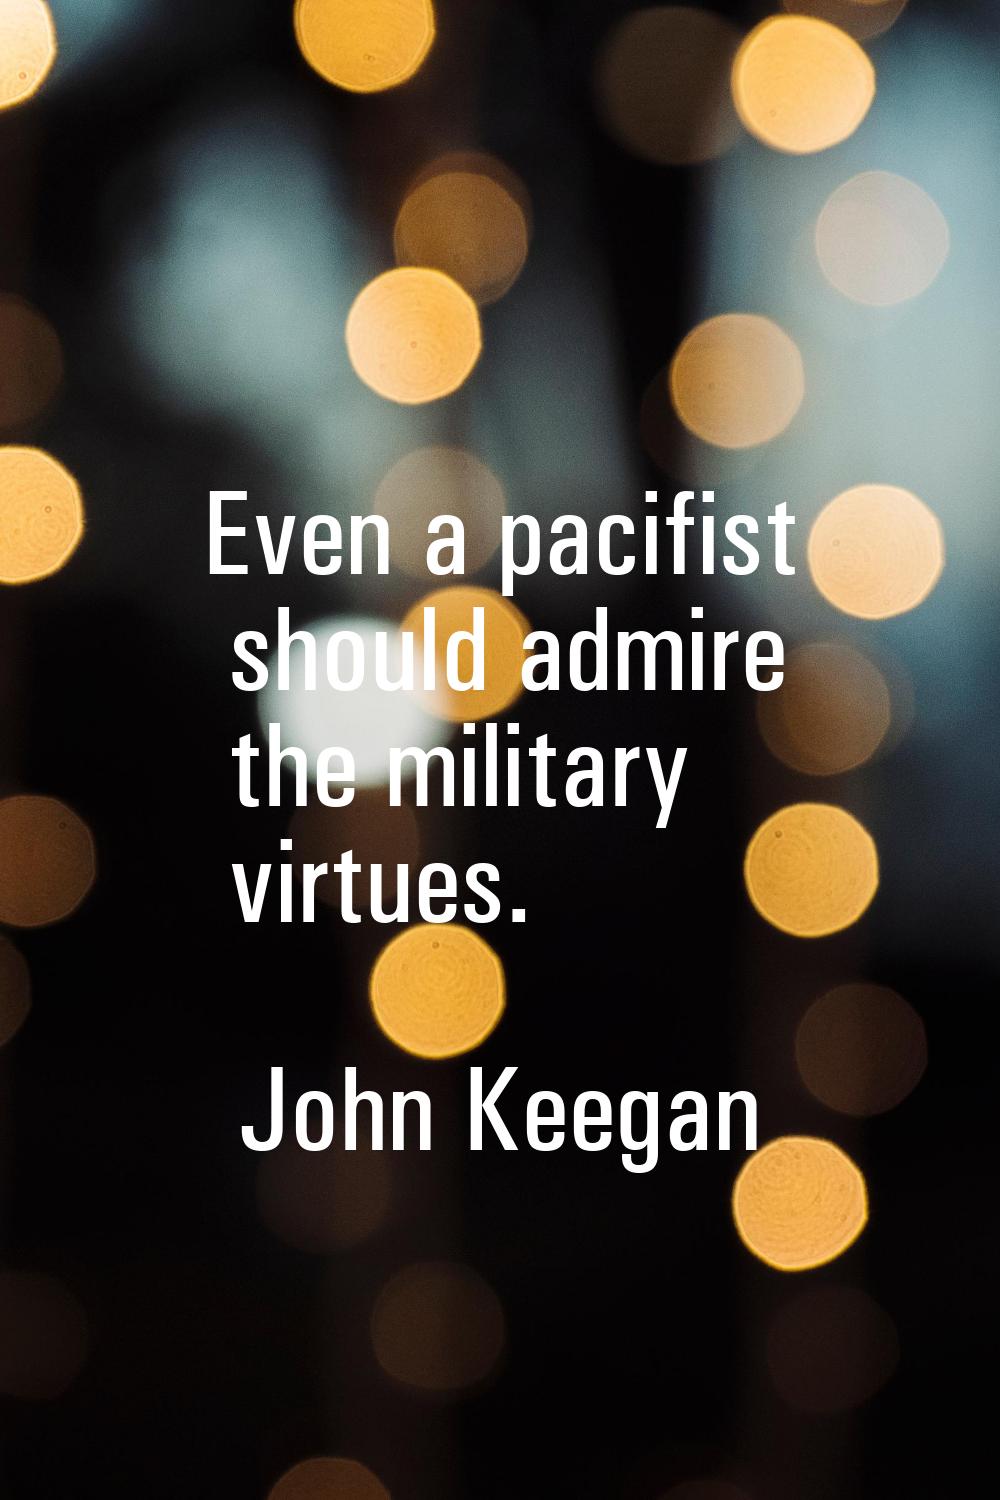 Even a pacifist should admire the military virtues.